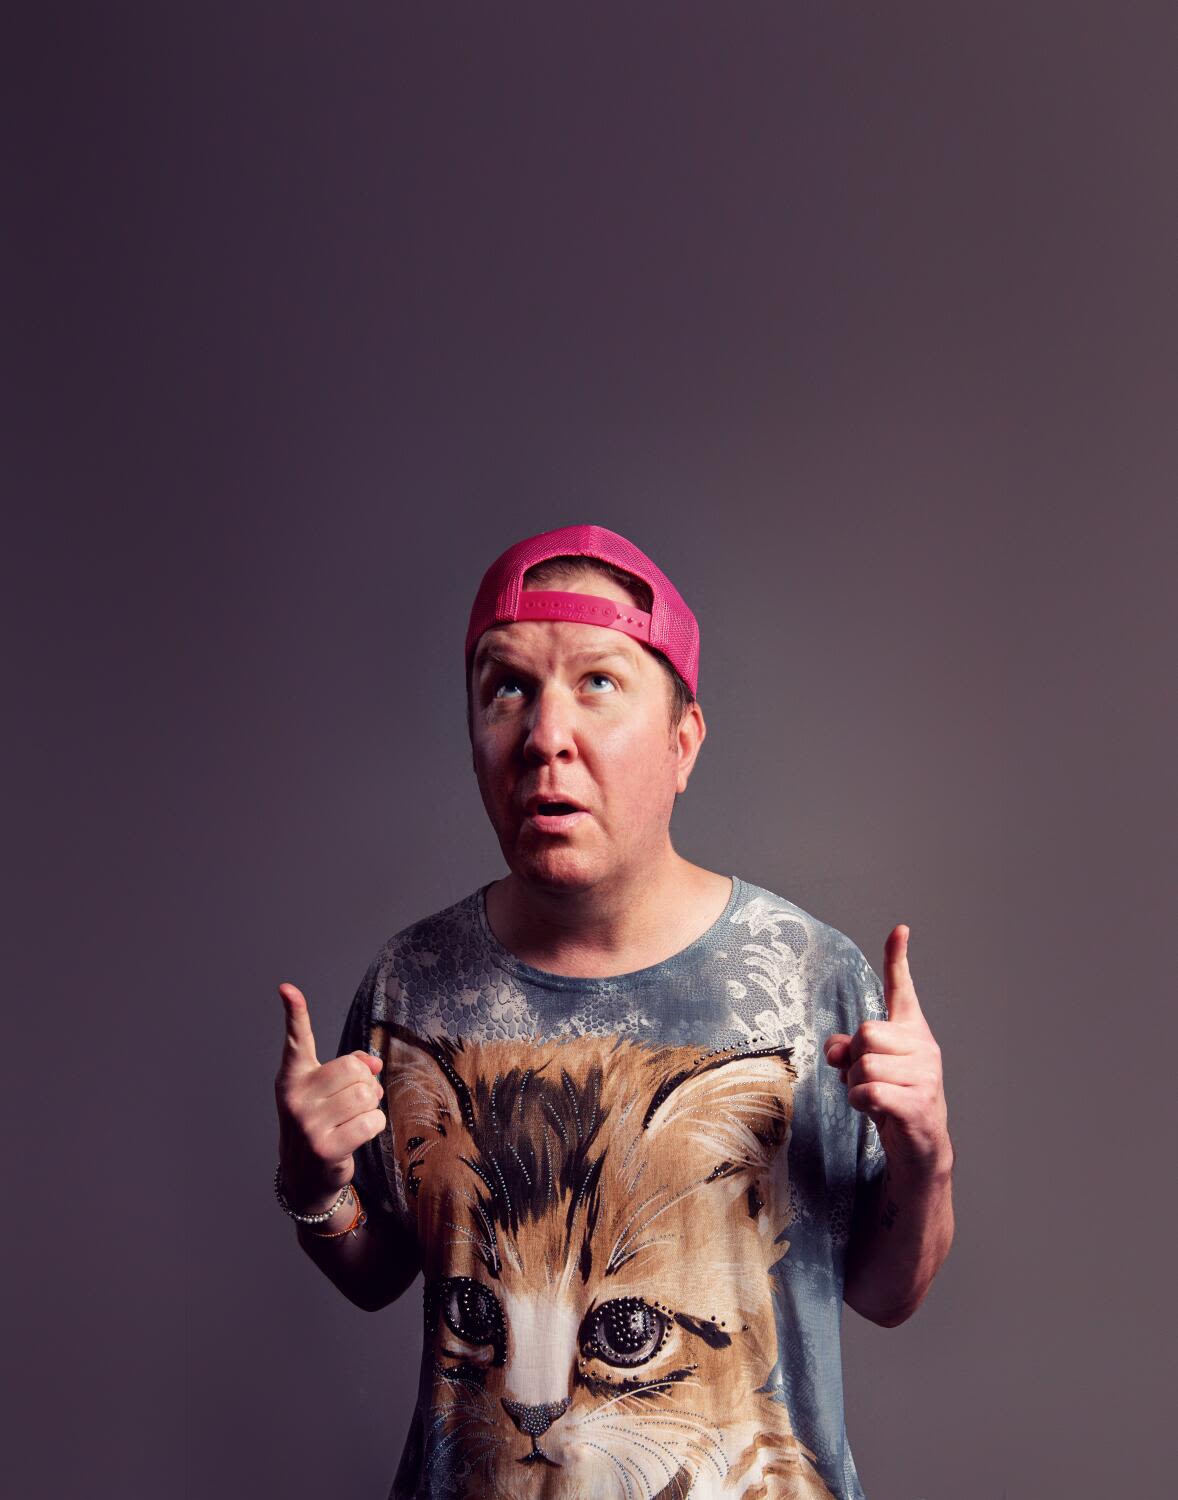 Comedian Nick Swardson flushes out new jokes tonight at the Roosevelt Hotel ahead of his "Toilet Head Tour"